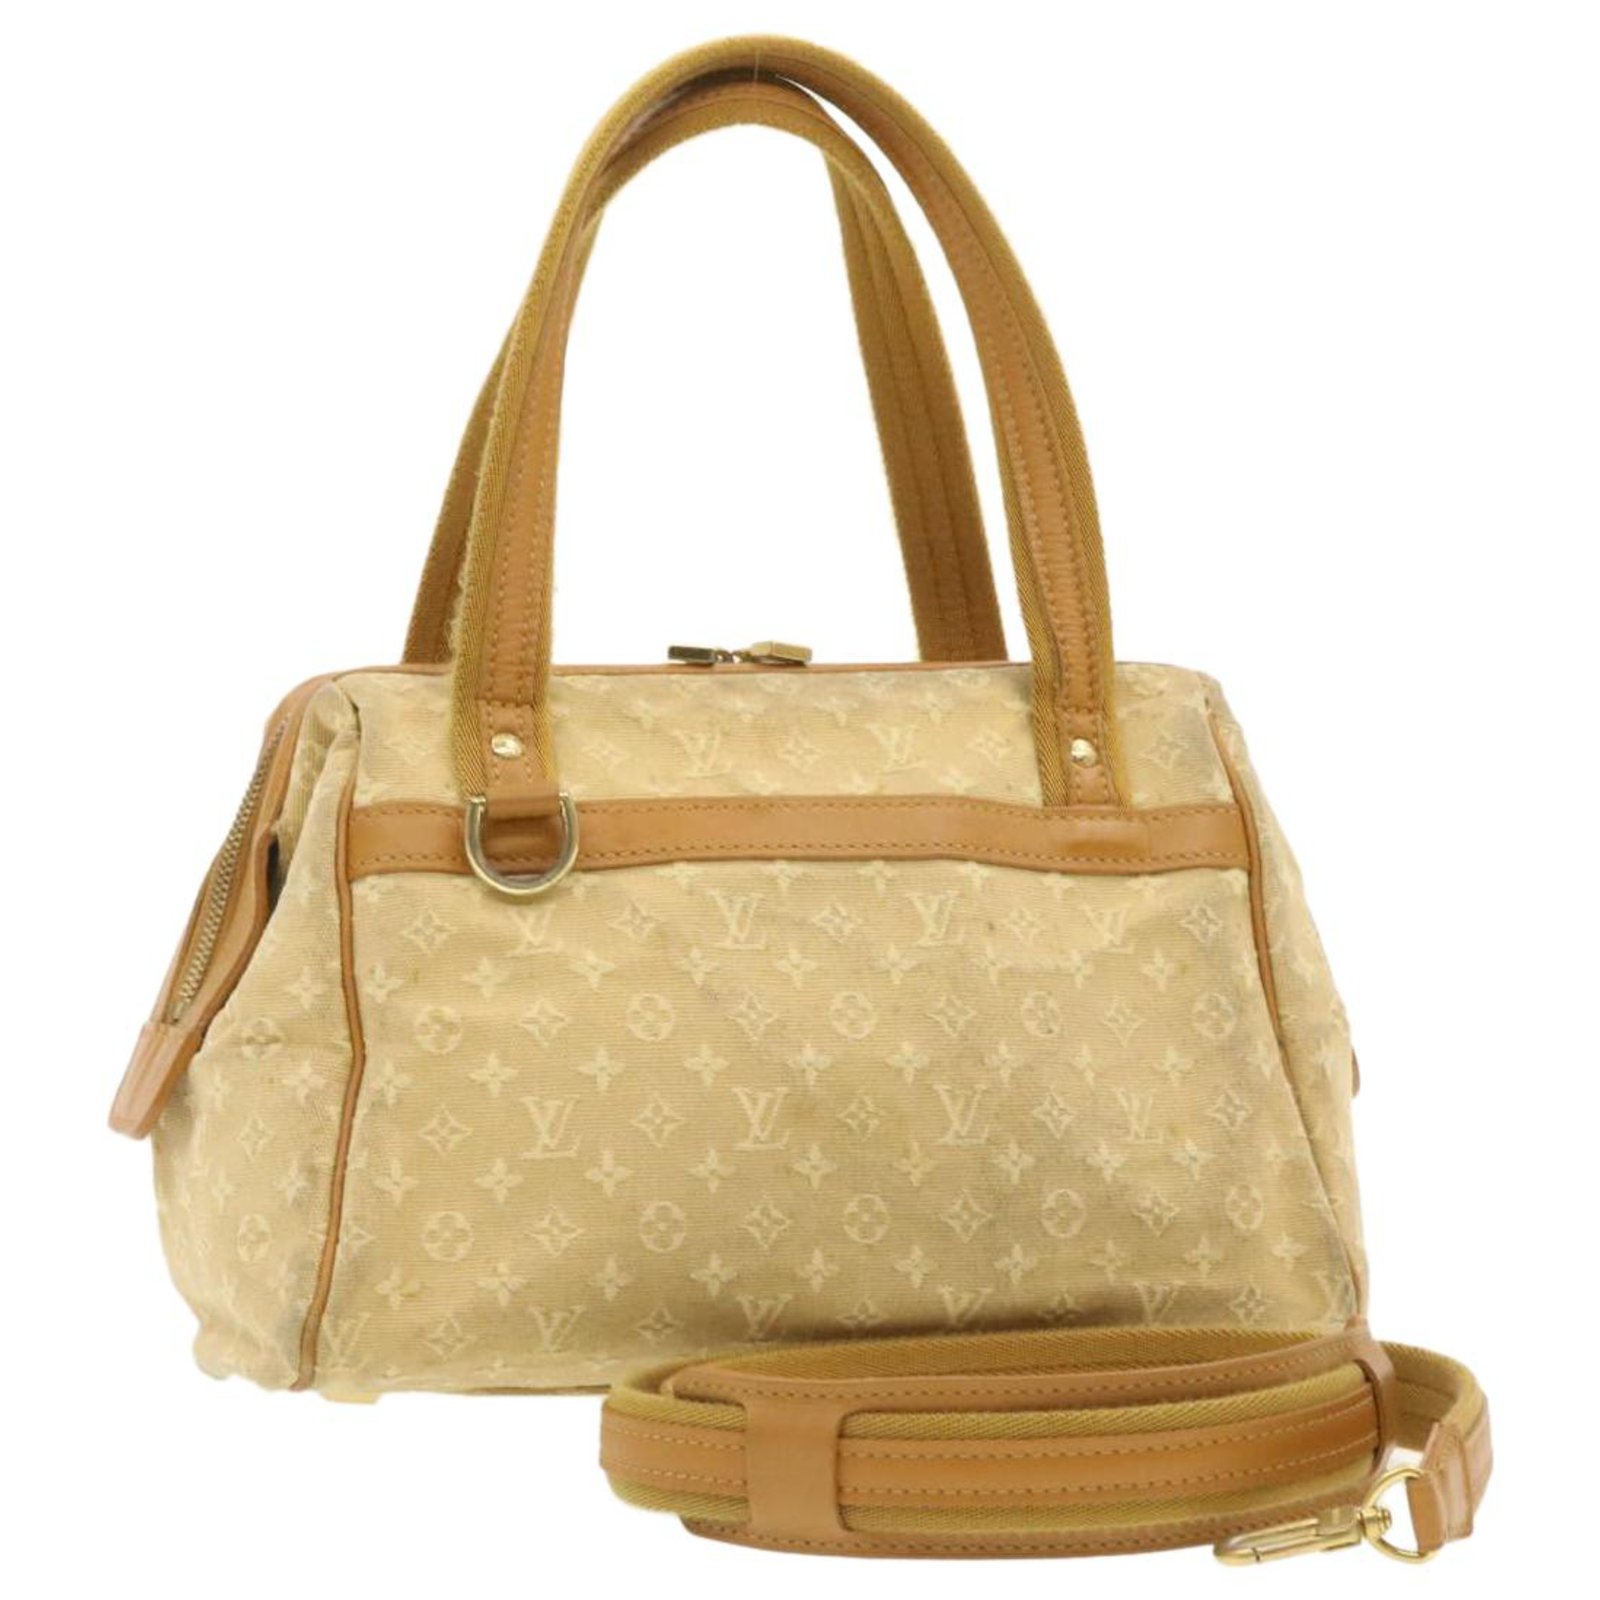 Louis Vuitton Carryall PM, Beige, One Size